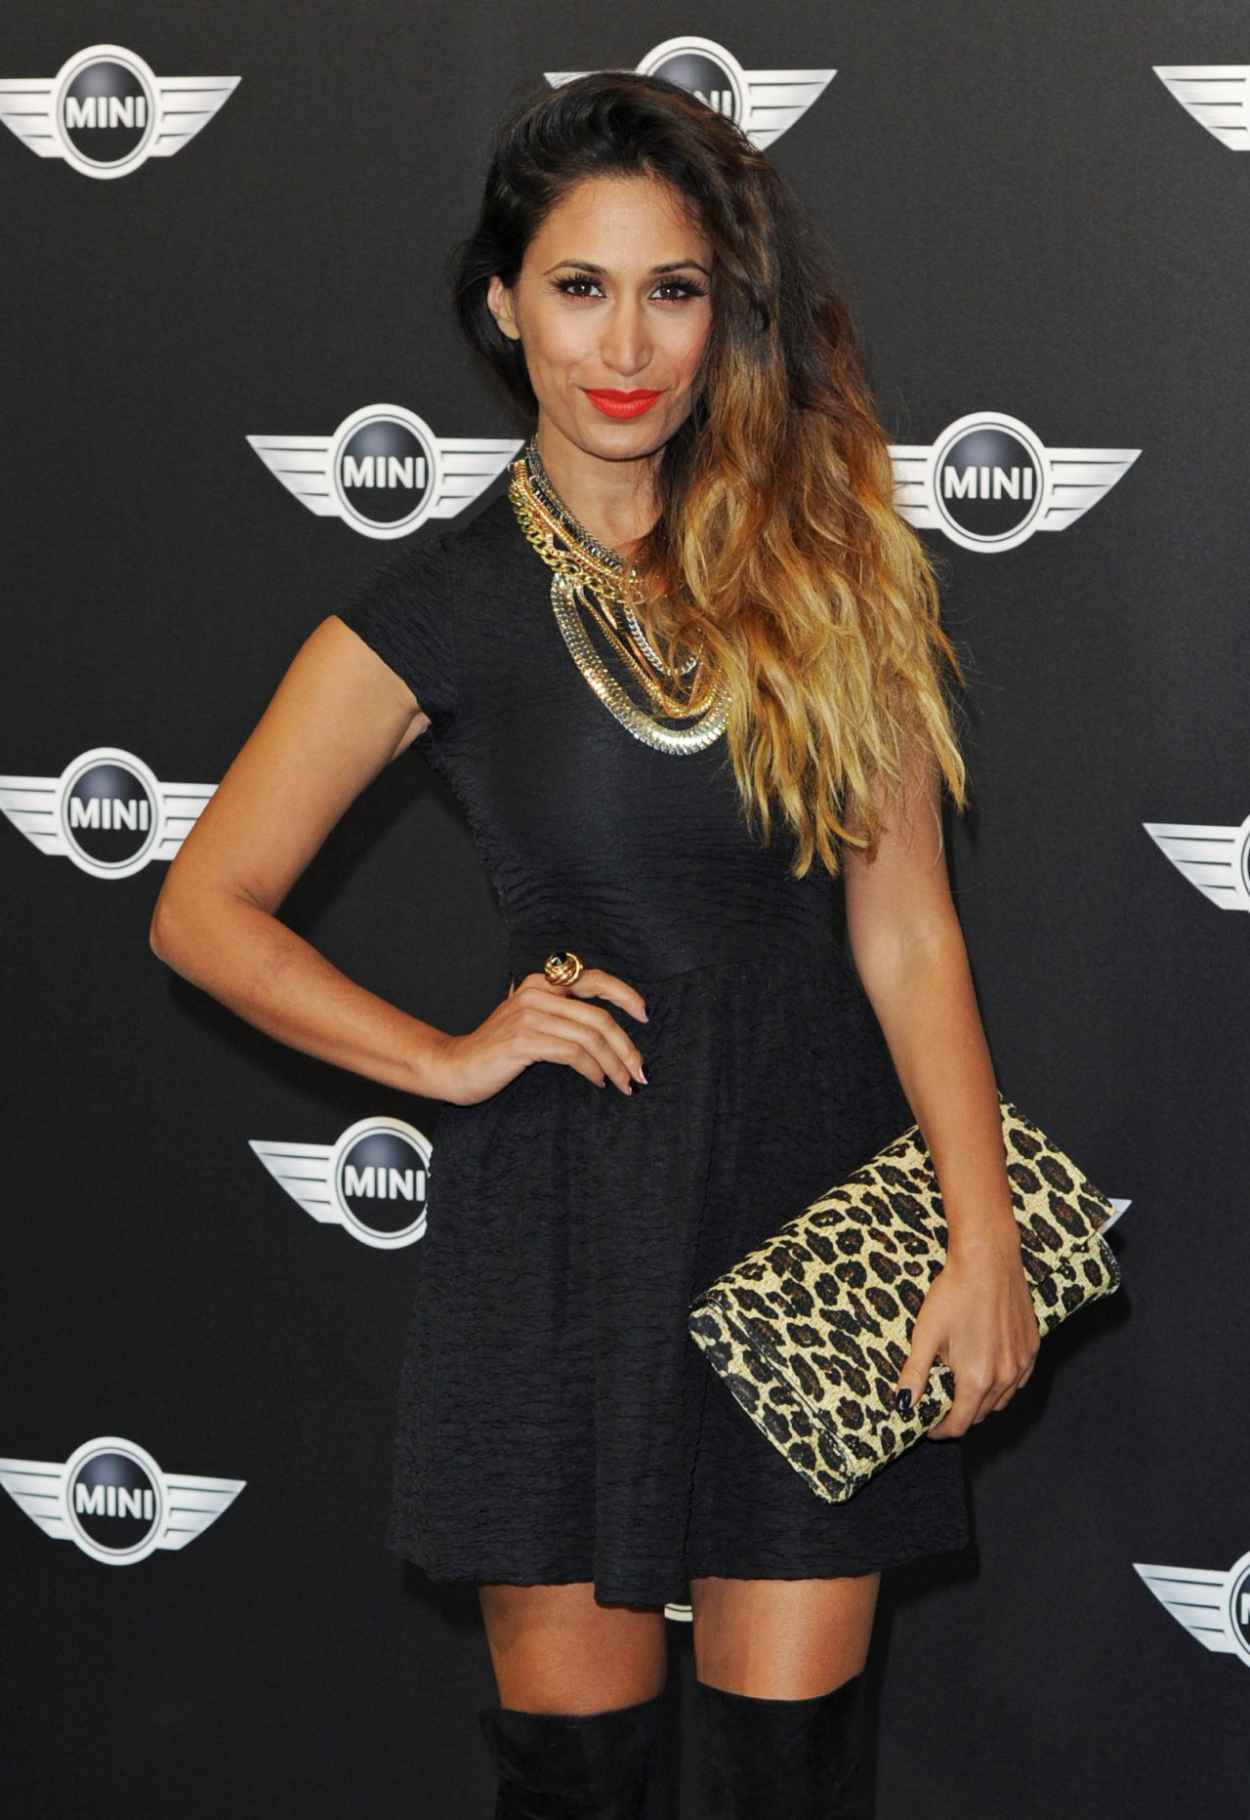 Preeya Kalidas Red Carpet Photos - The MINI Launch Party at The Old Sorting Office in London - November 2015-2